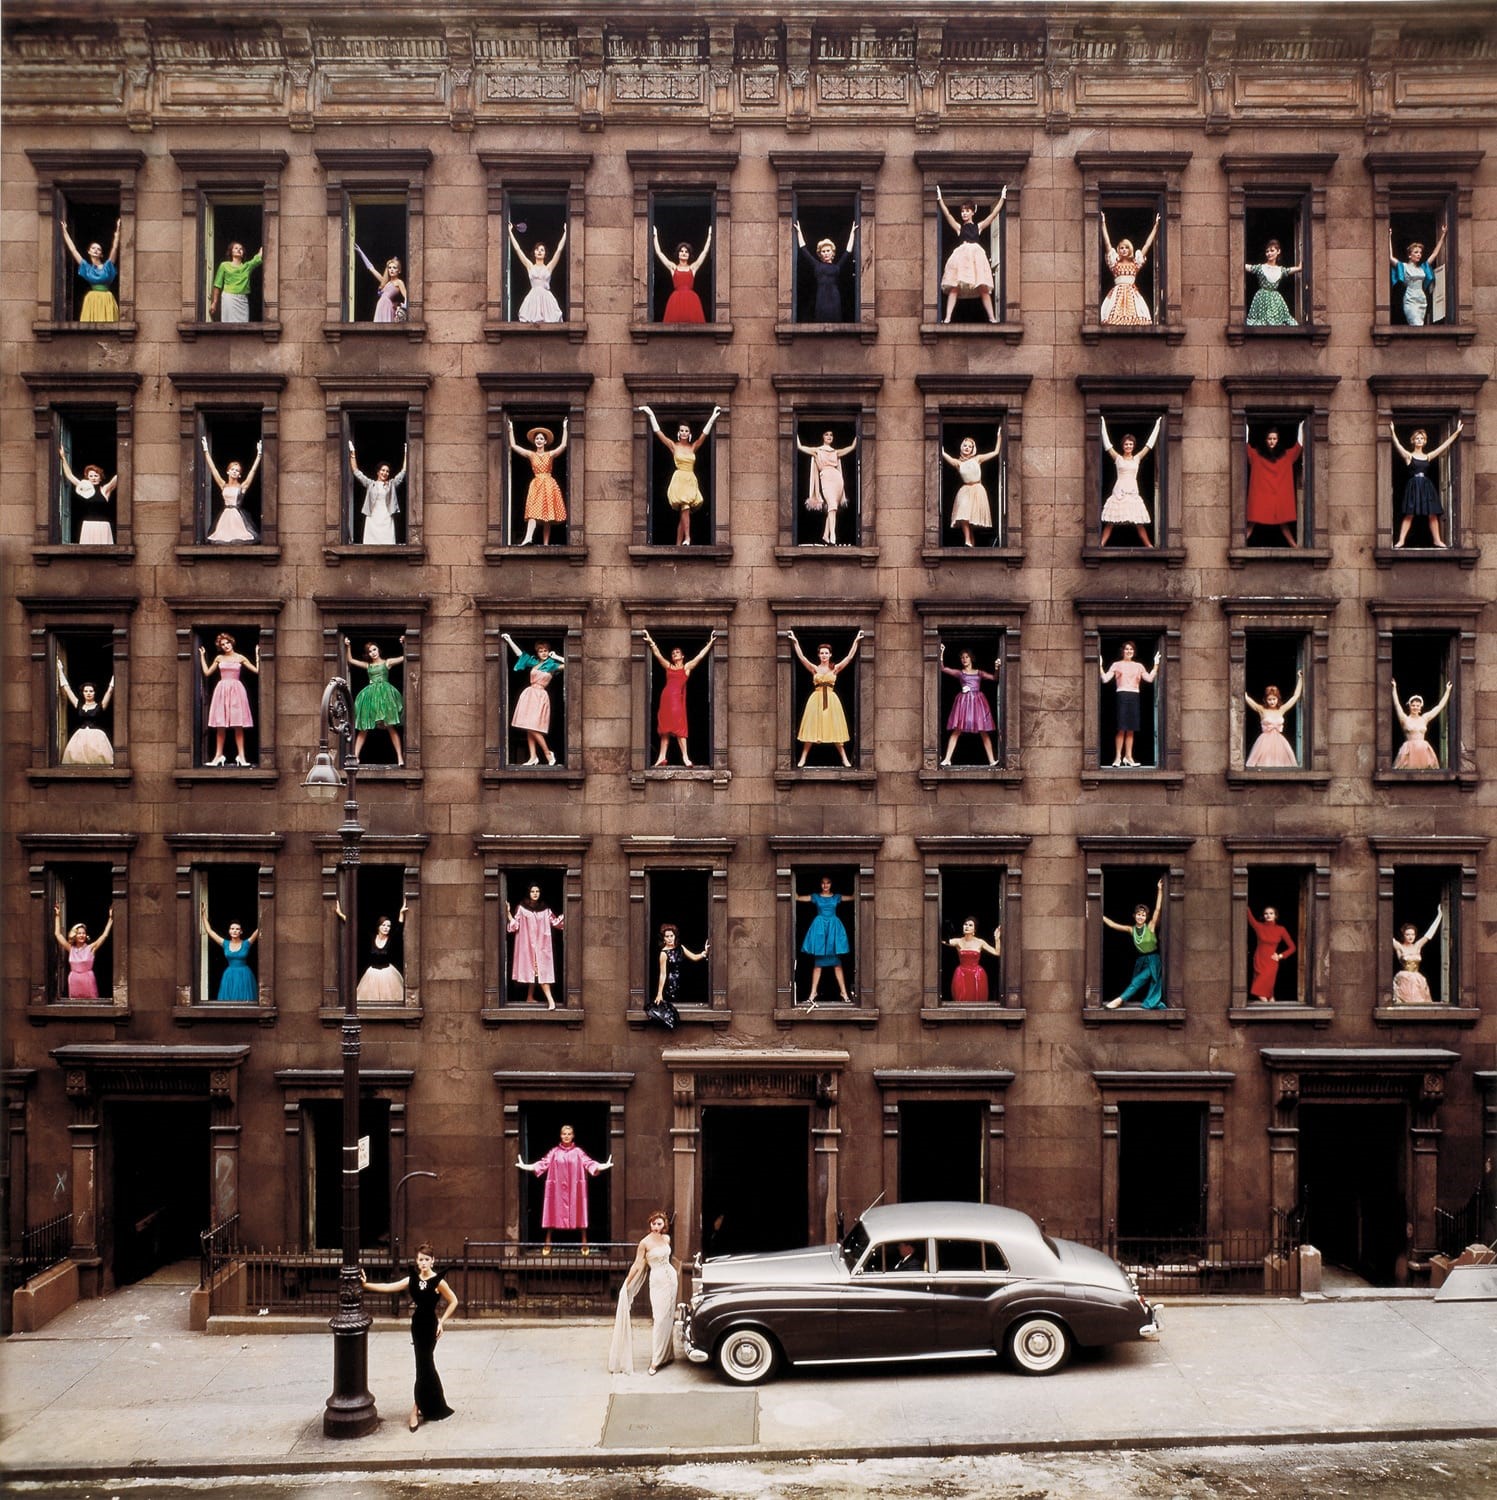 Models in the windows, New York, 1960